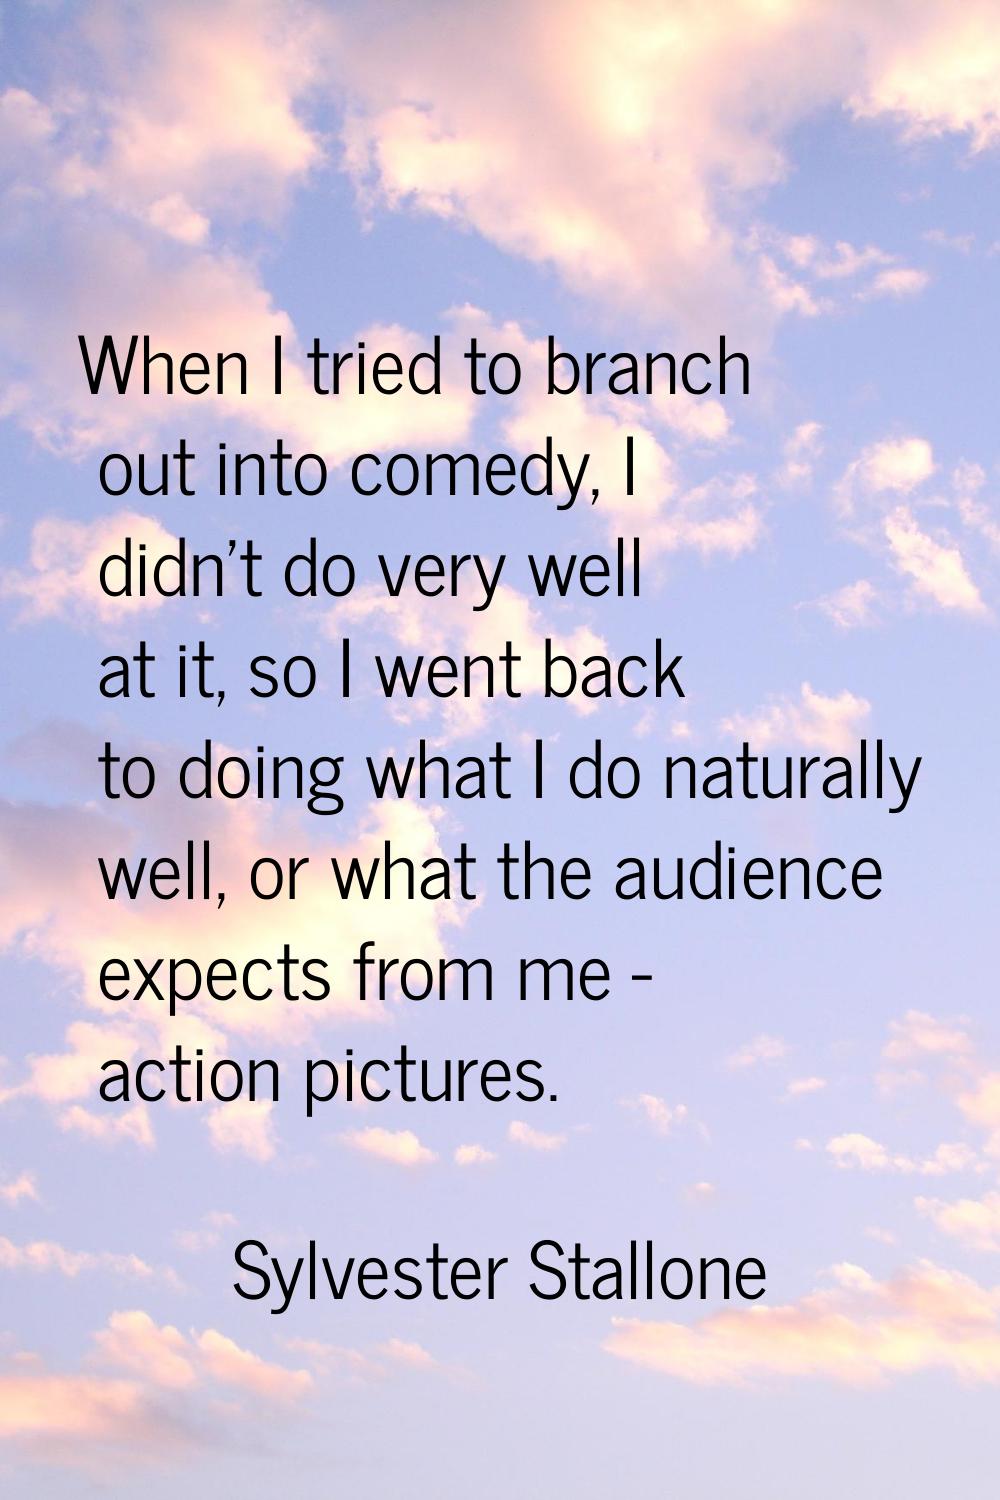 When I tried to branch out into comedy, I didn't do very well at it, so I went back to doing what I